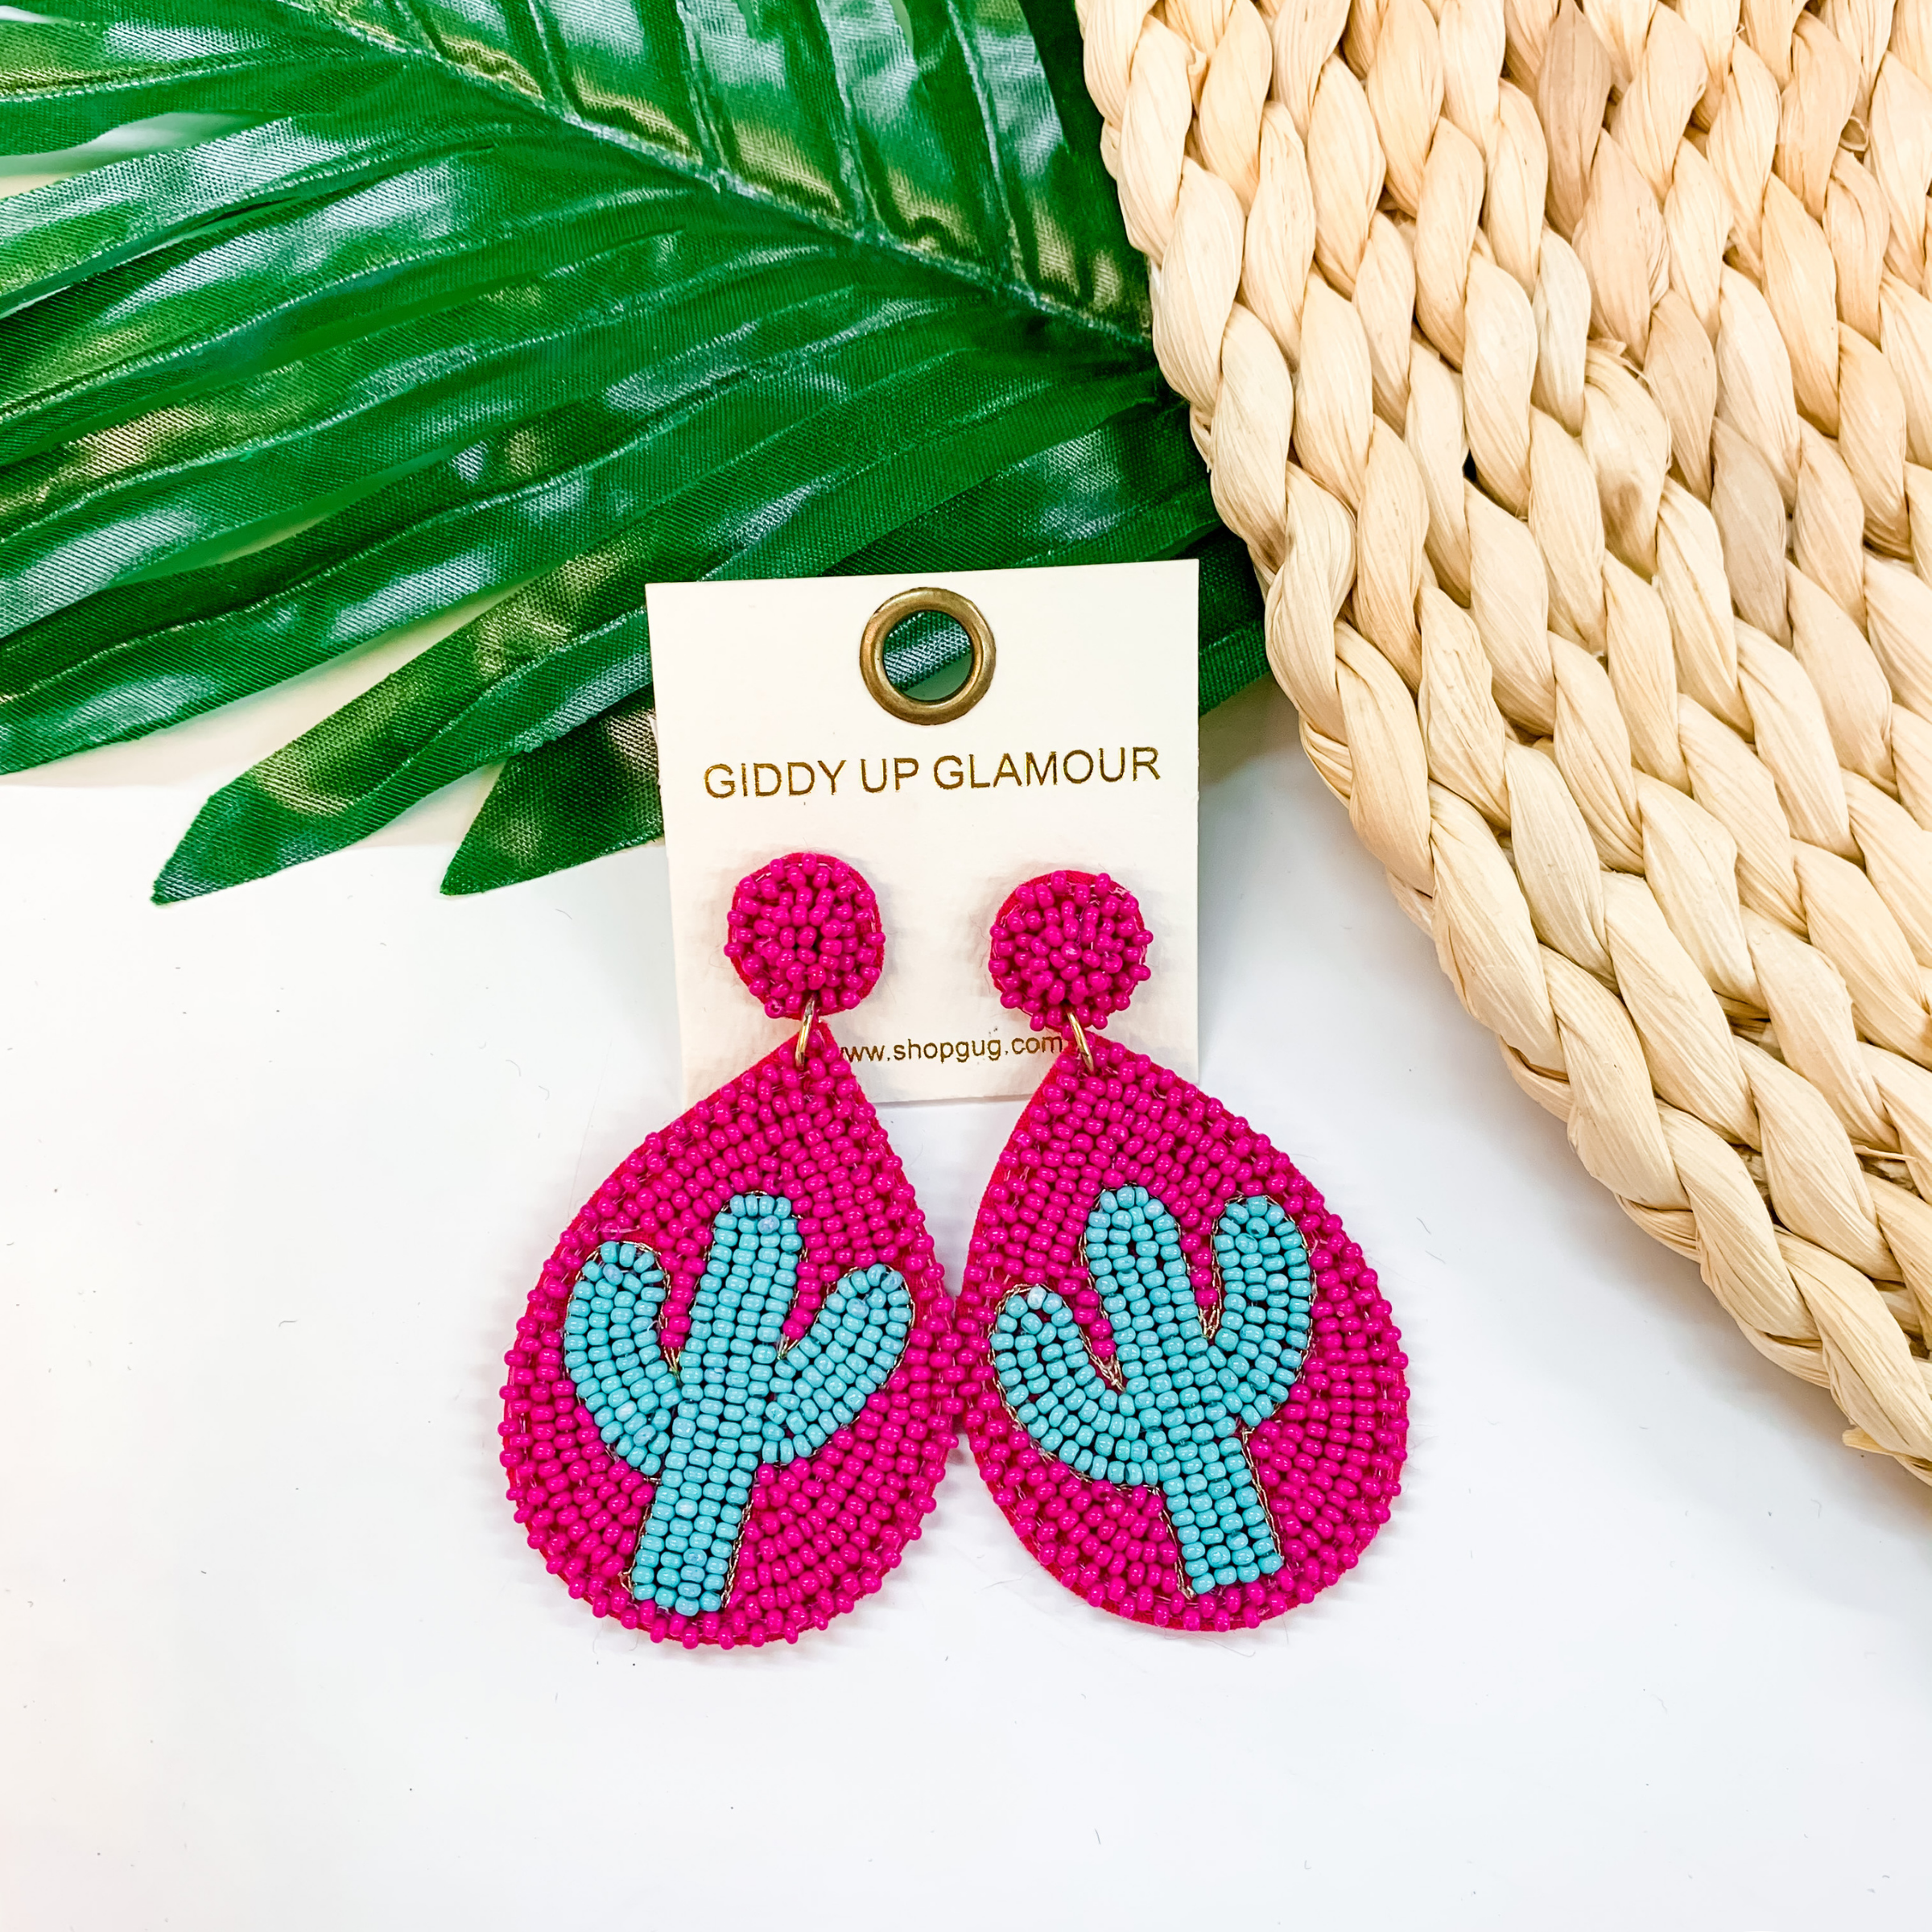 Lookin' Sharp Seed Bead Cactus Teardrop Earrings In Fuchsia and Turquoise - Giddy Up Glamour Boutique